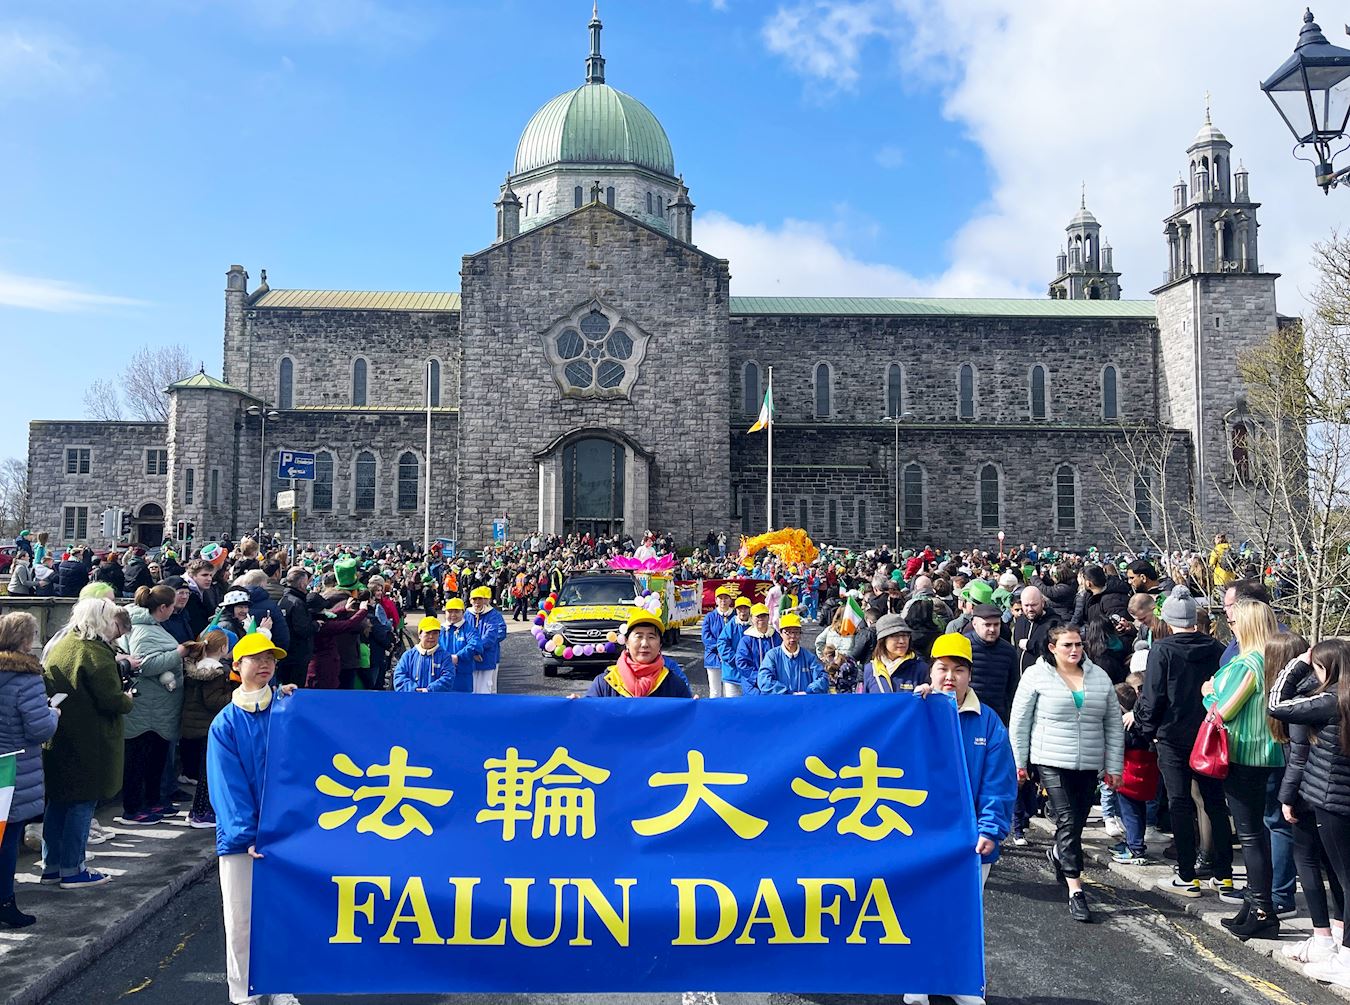 Image for article Ireland: Falun Dafa Featured in St. Patrick’s Day Parade in Galway